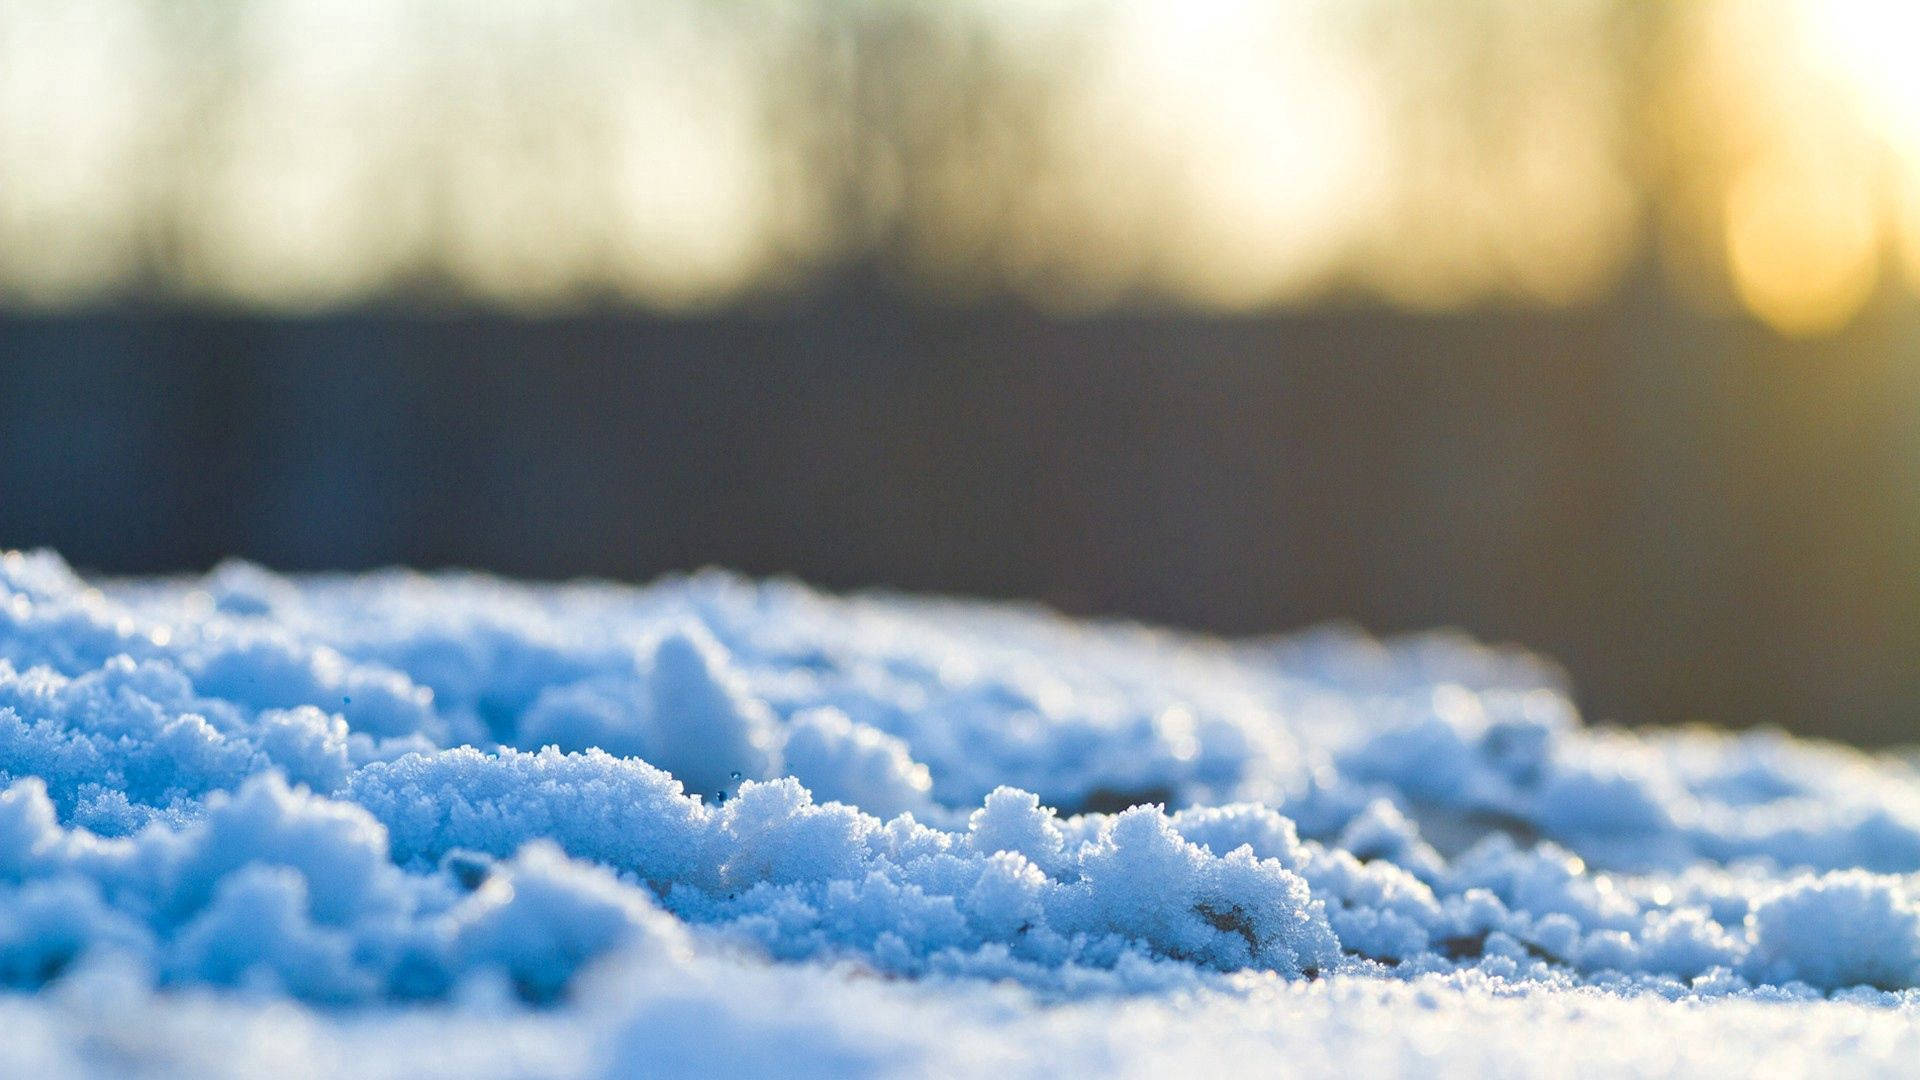 A Close Up Of Snow Covered Ground With The Sun Shining On It Background